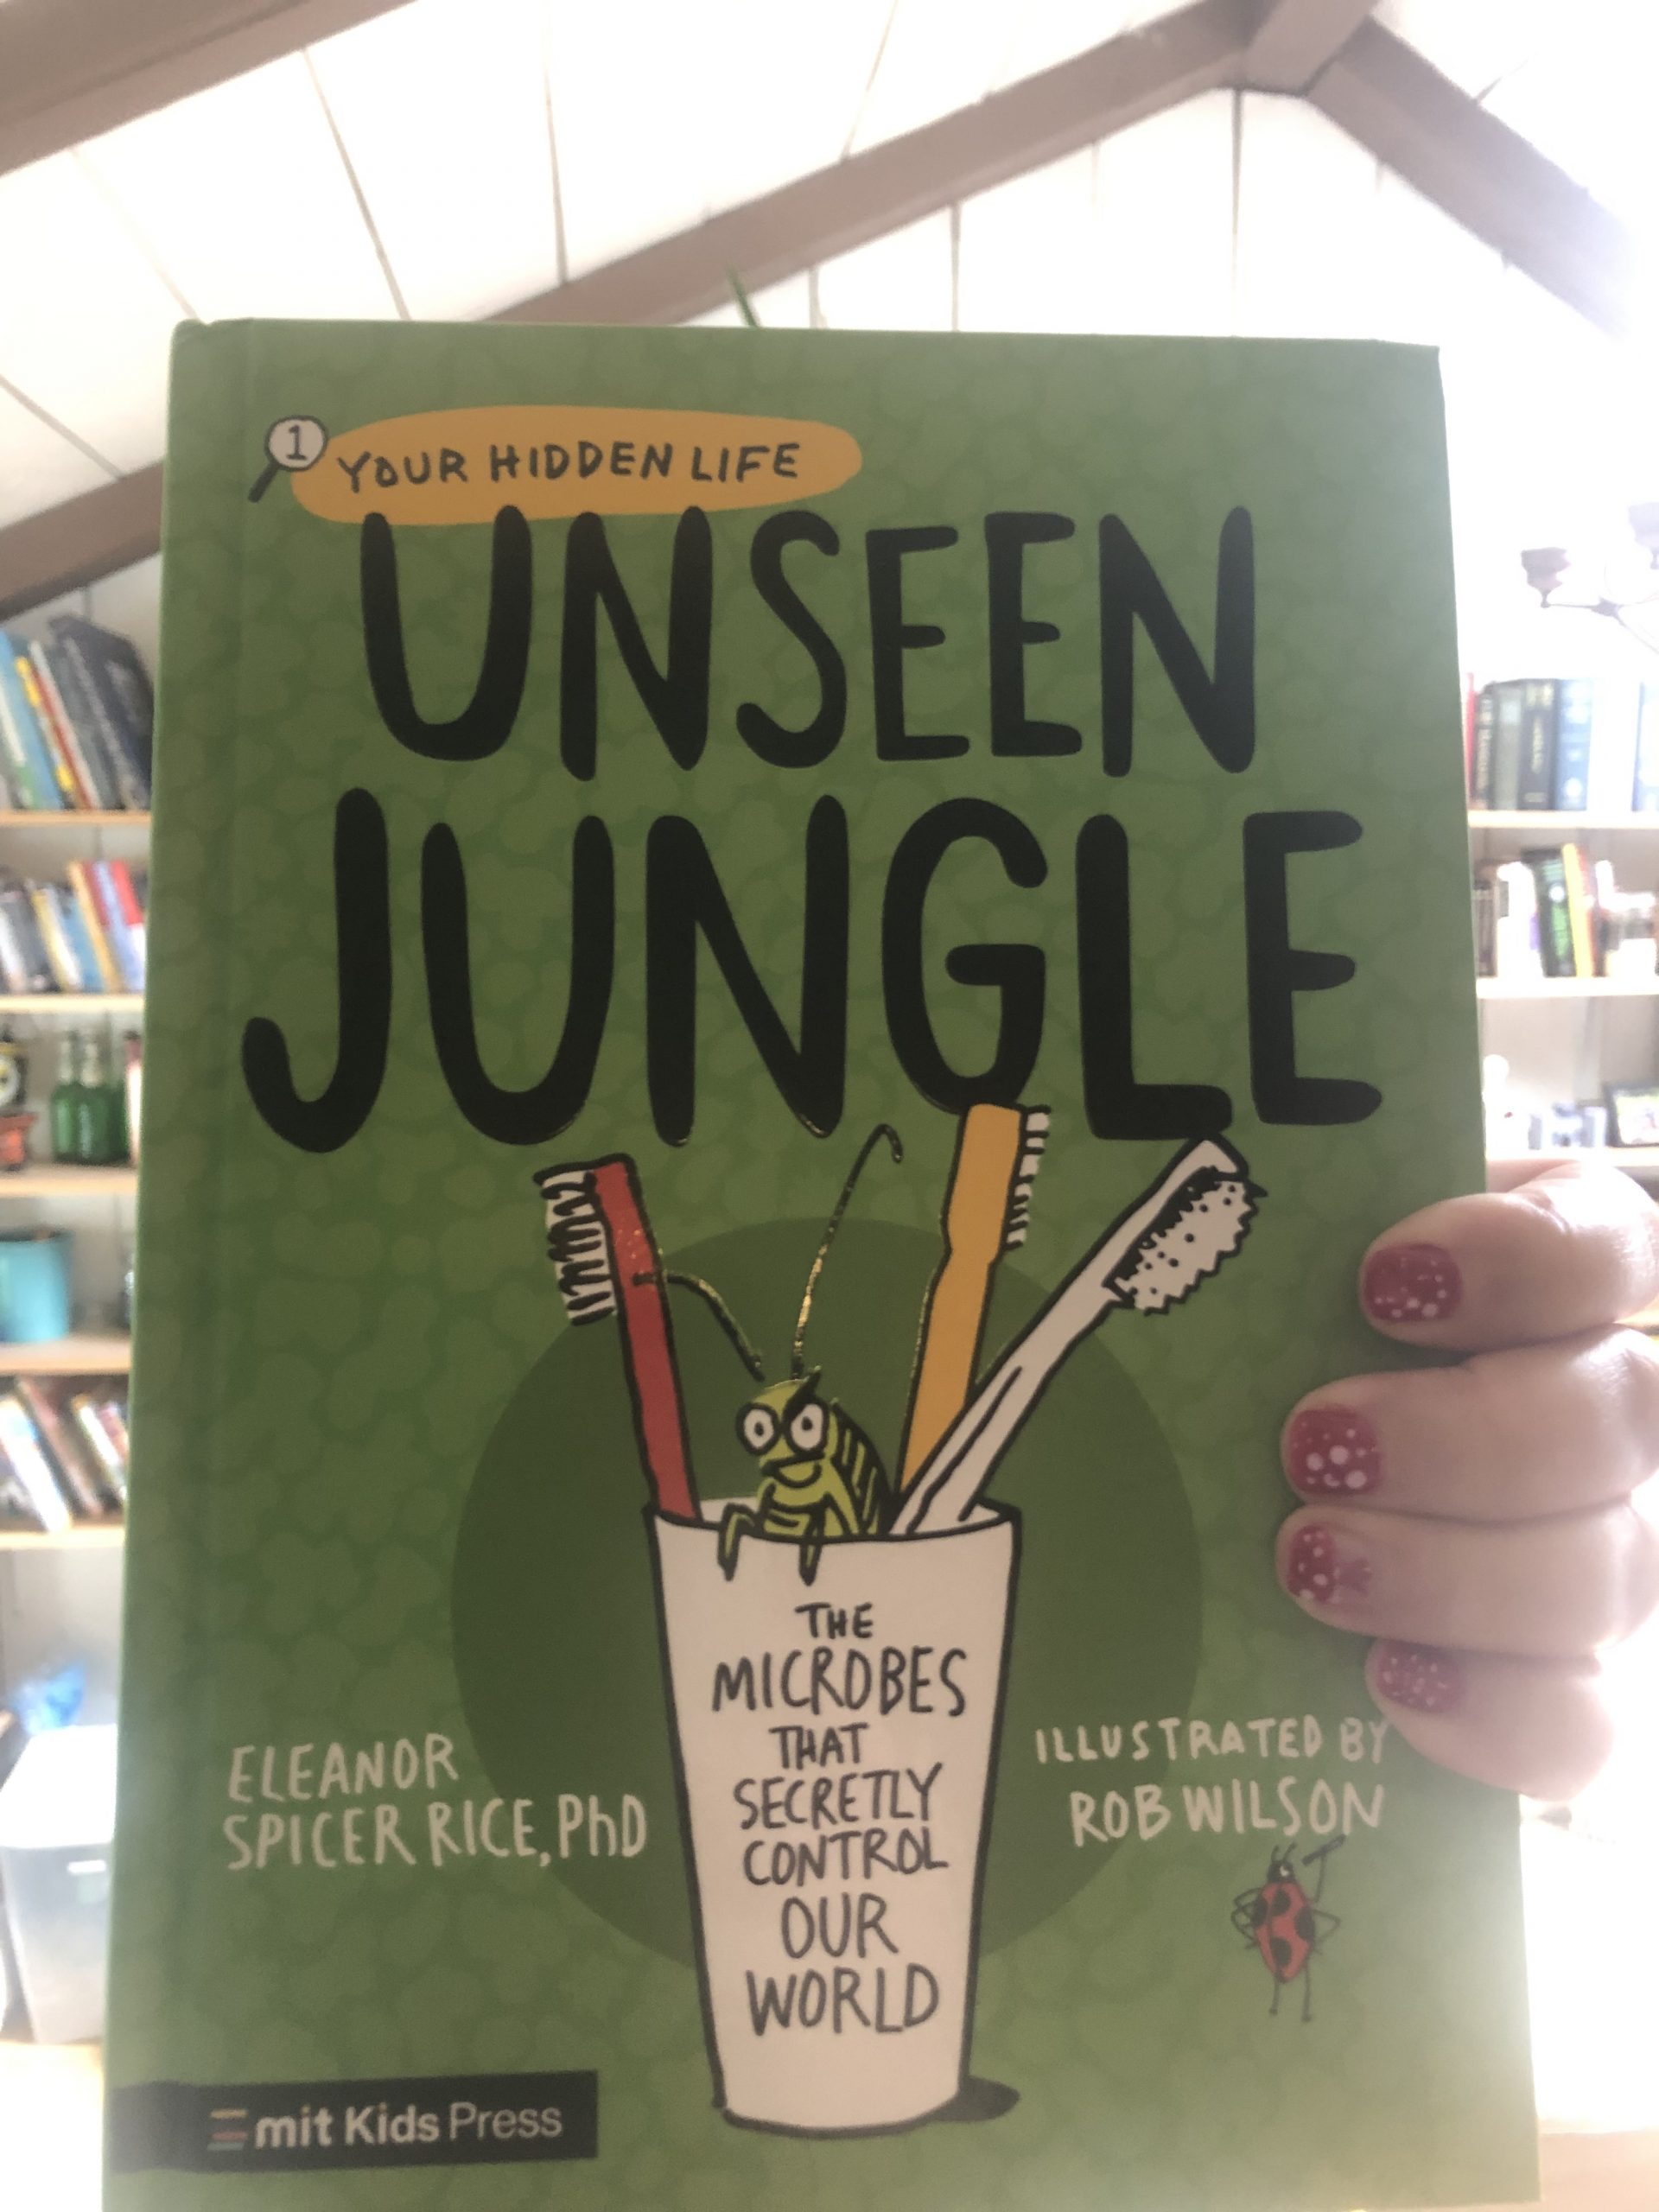 Cover of Unseen Jungle book by Dr. Eleanor Spicer Rice and Illustrated by Rob Wilson.